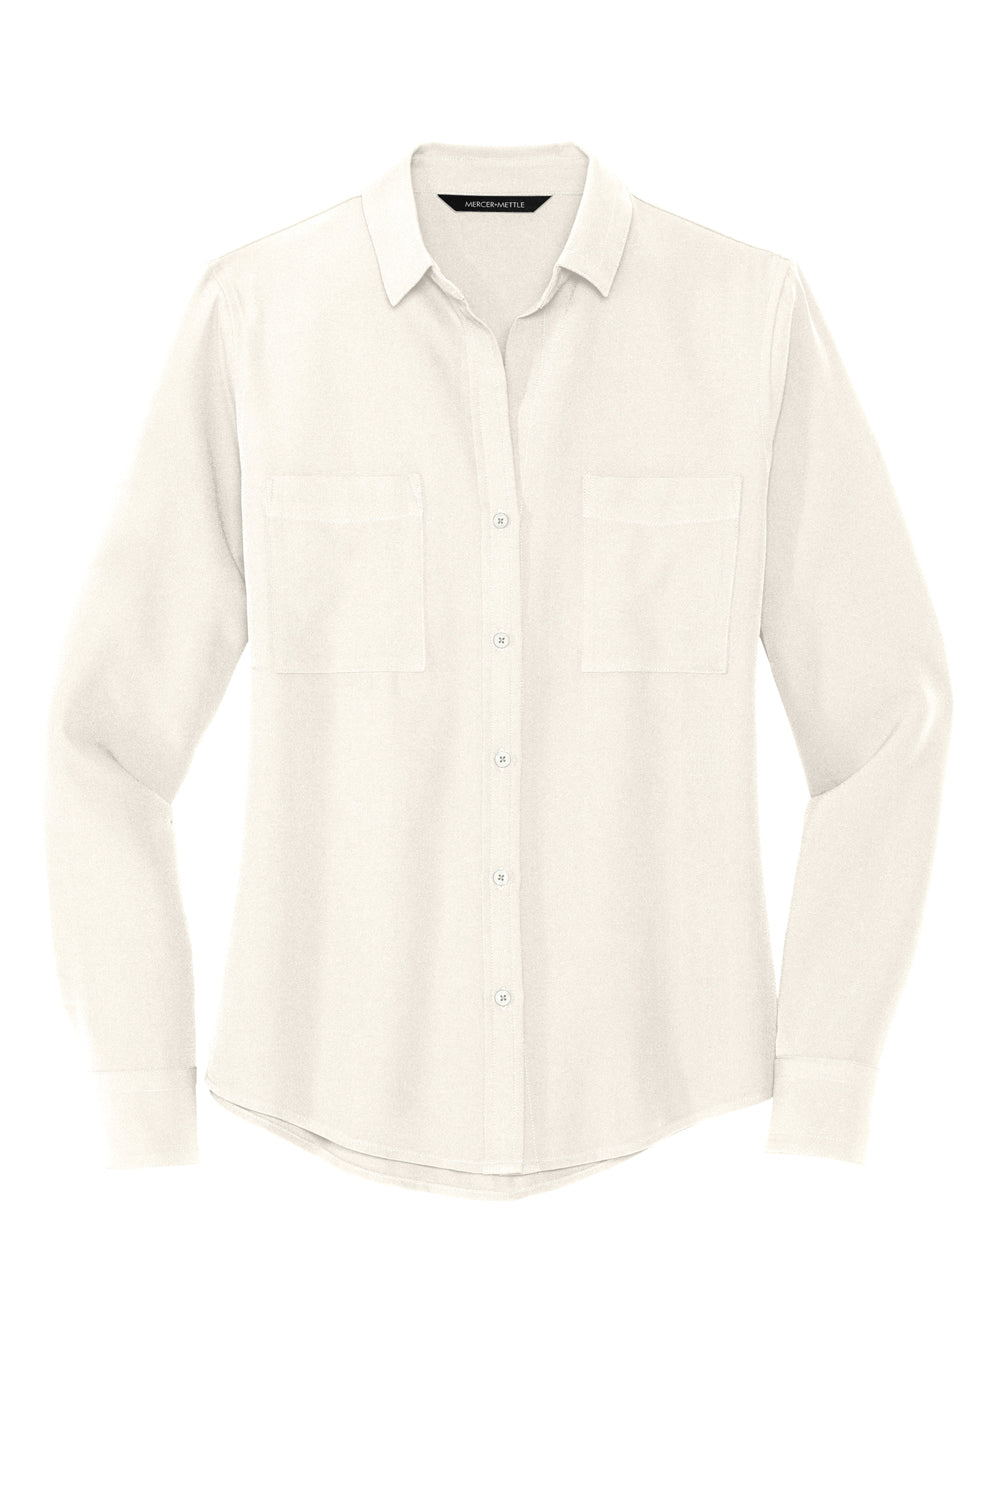 Mercer+Mettle MM2013 Stretch Crepe Long Sleeve Button Down Shirt Ivory Chiffon White Flat Front